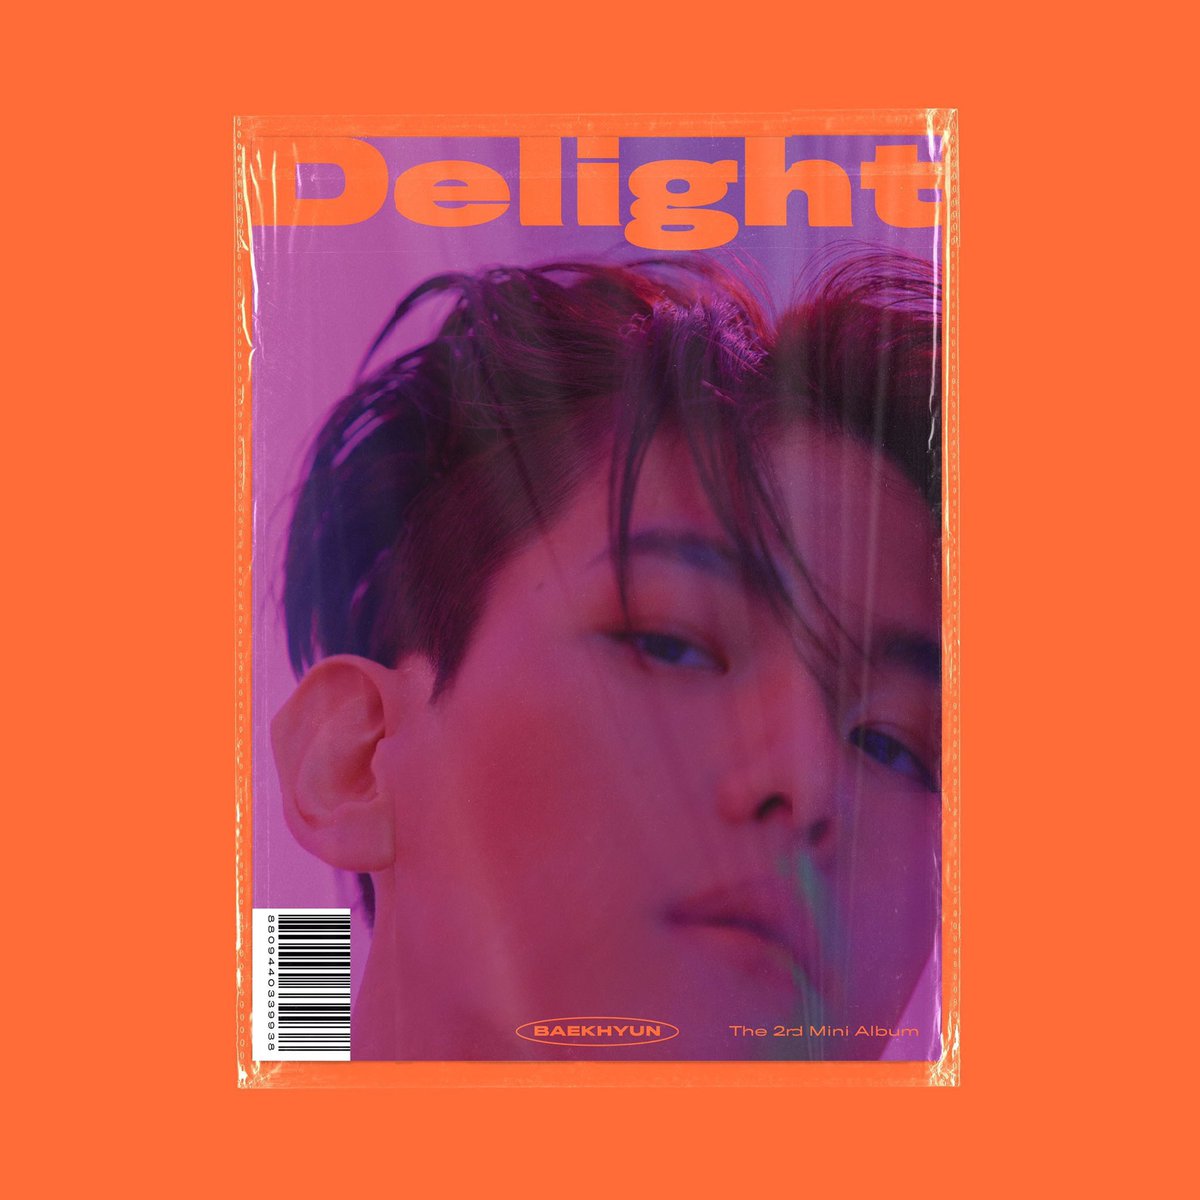 Thank you for enjoying this short thread These the original picts from Baekhyun Delight albums (I forgot I should put it for the first tweet in this thread)